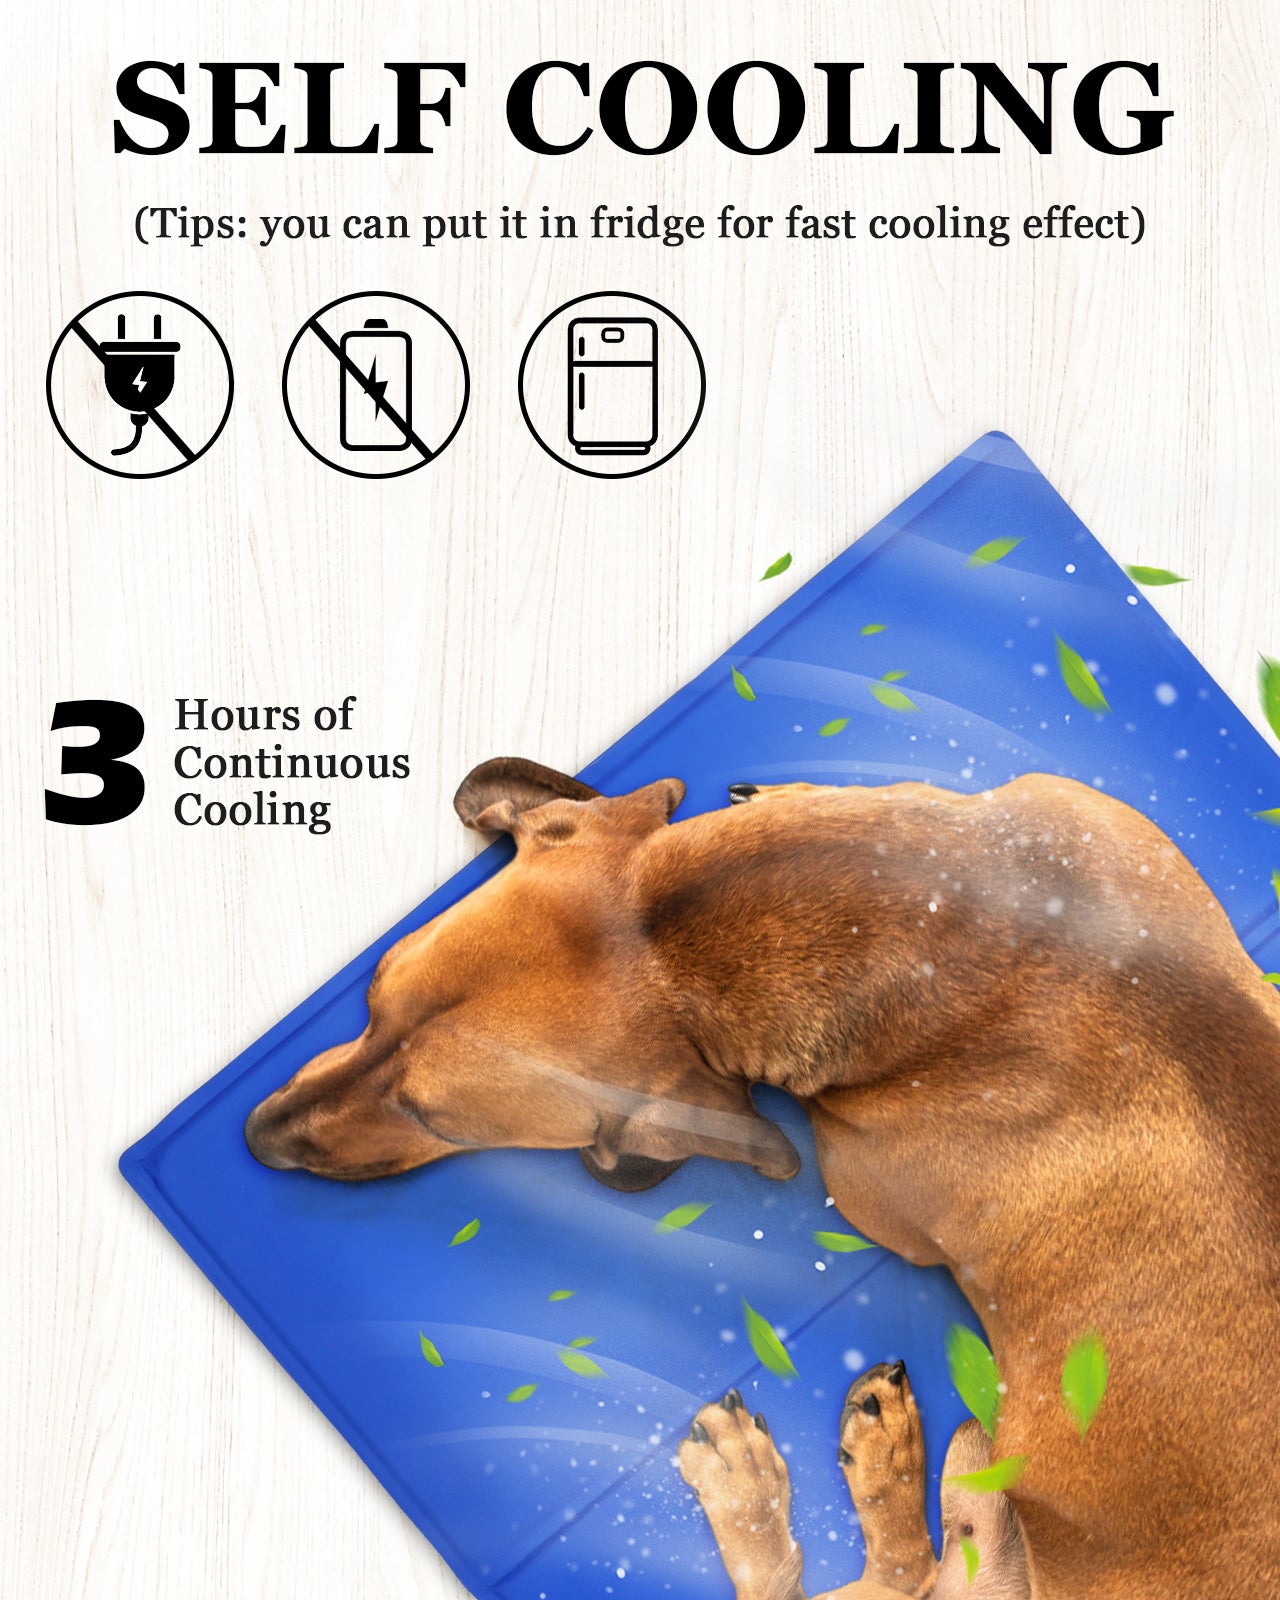 Zacro Dog Cooling Mat, 3 Hour Self Cooling Gel Pad for Dog/Cat, 35” x 19.6” Durable Cooling Dog Bed Mats for Crate/Sofa/Bed/Floor/Car Seats